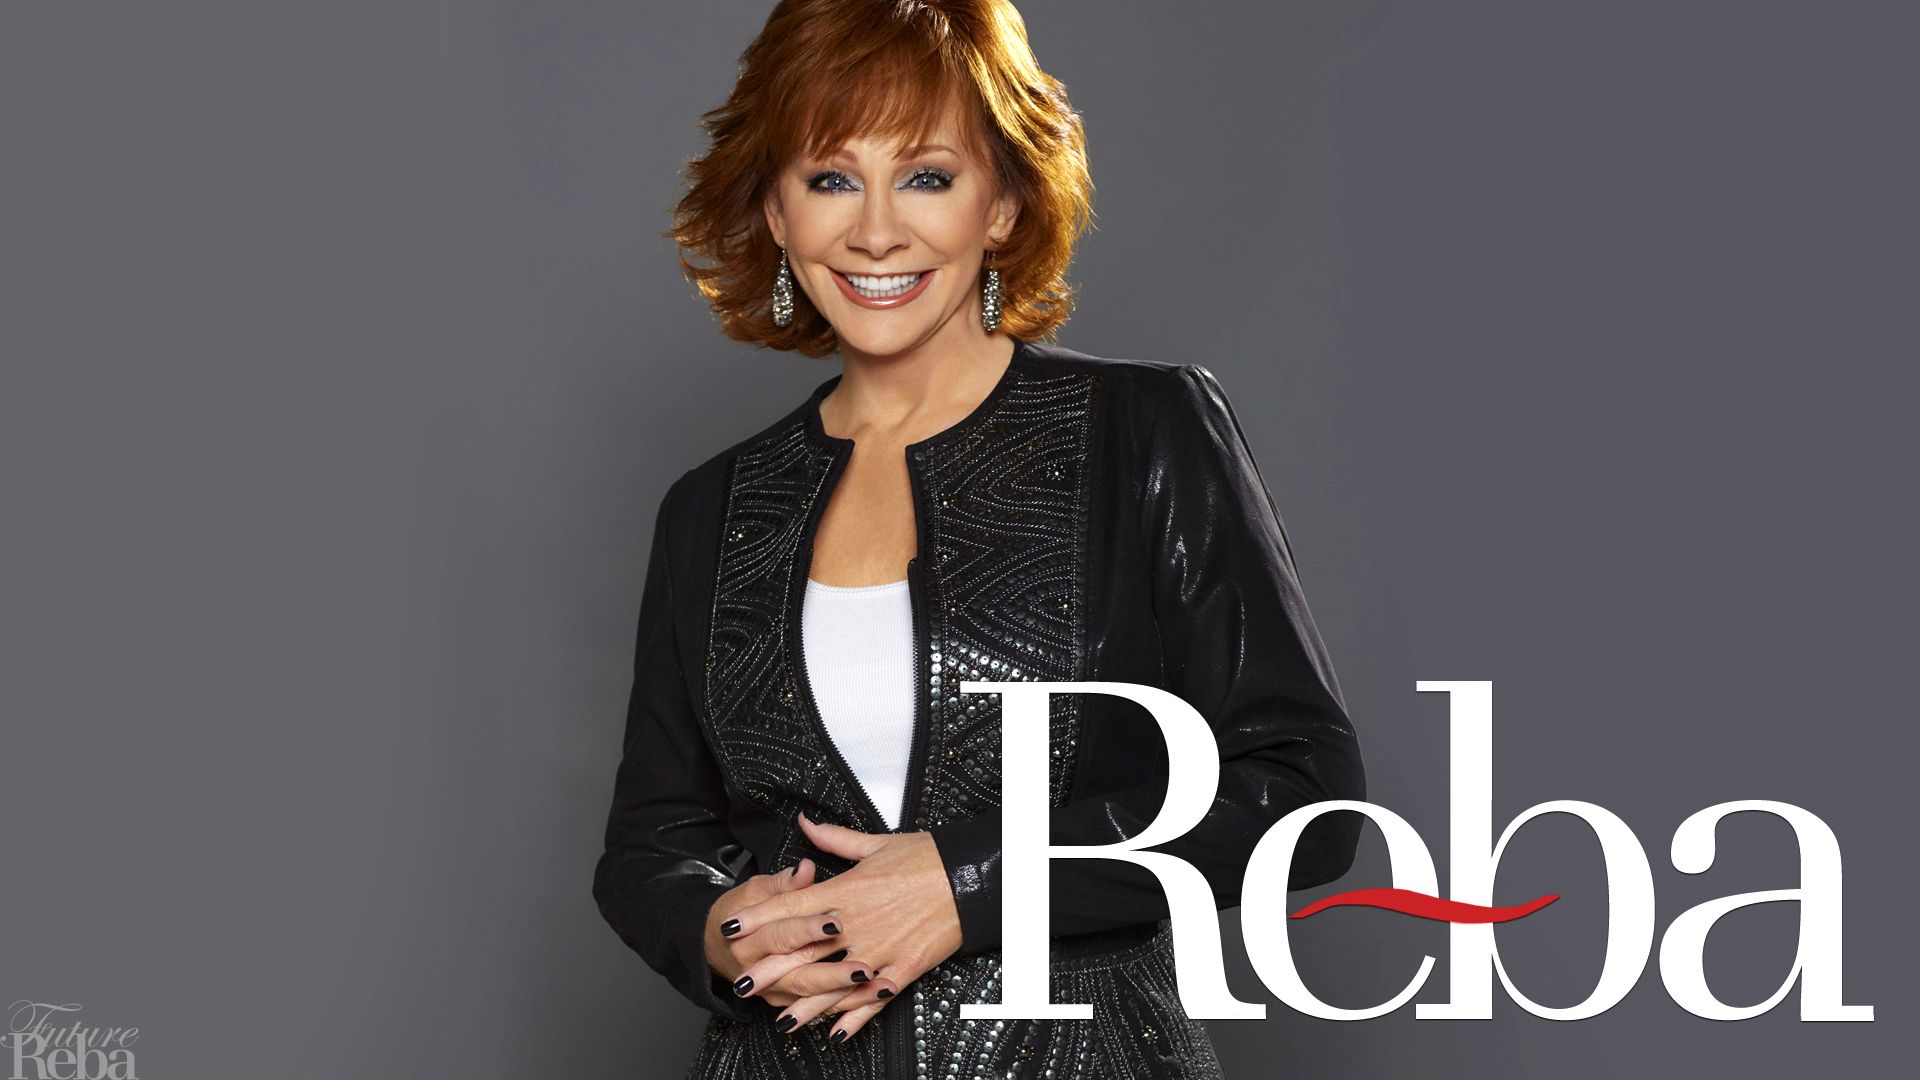 Reba McEntire HD Wallpapers and Backgrounds. 